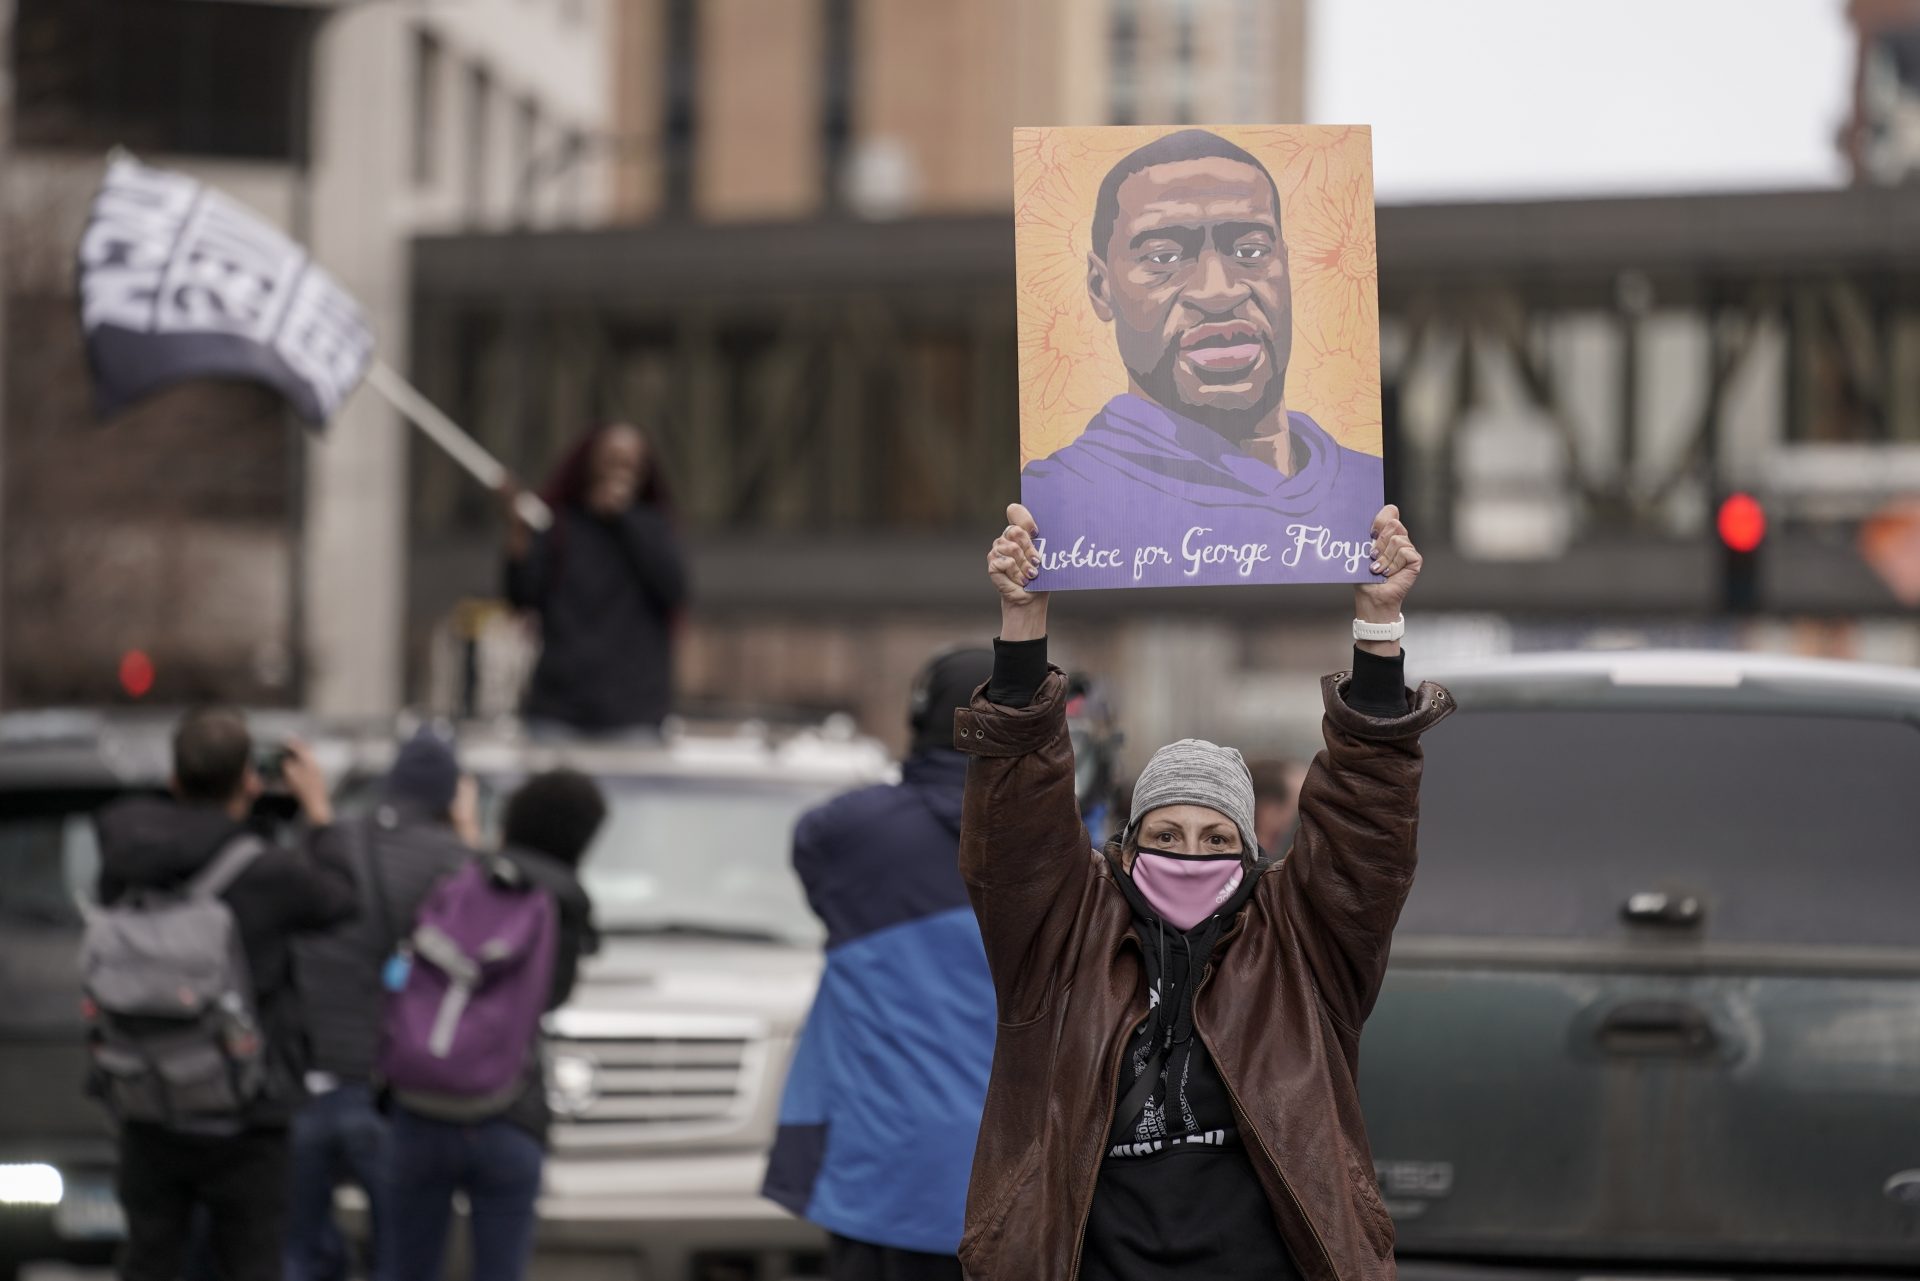 People celebrate outside the courthouse in Minneapolis, Tuesday, April 20, 2021, after the guilty verdicts were announced in the murder trial of former Minneapolis police Officer Derek Chauvin in the killing of George Floyd. (